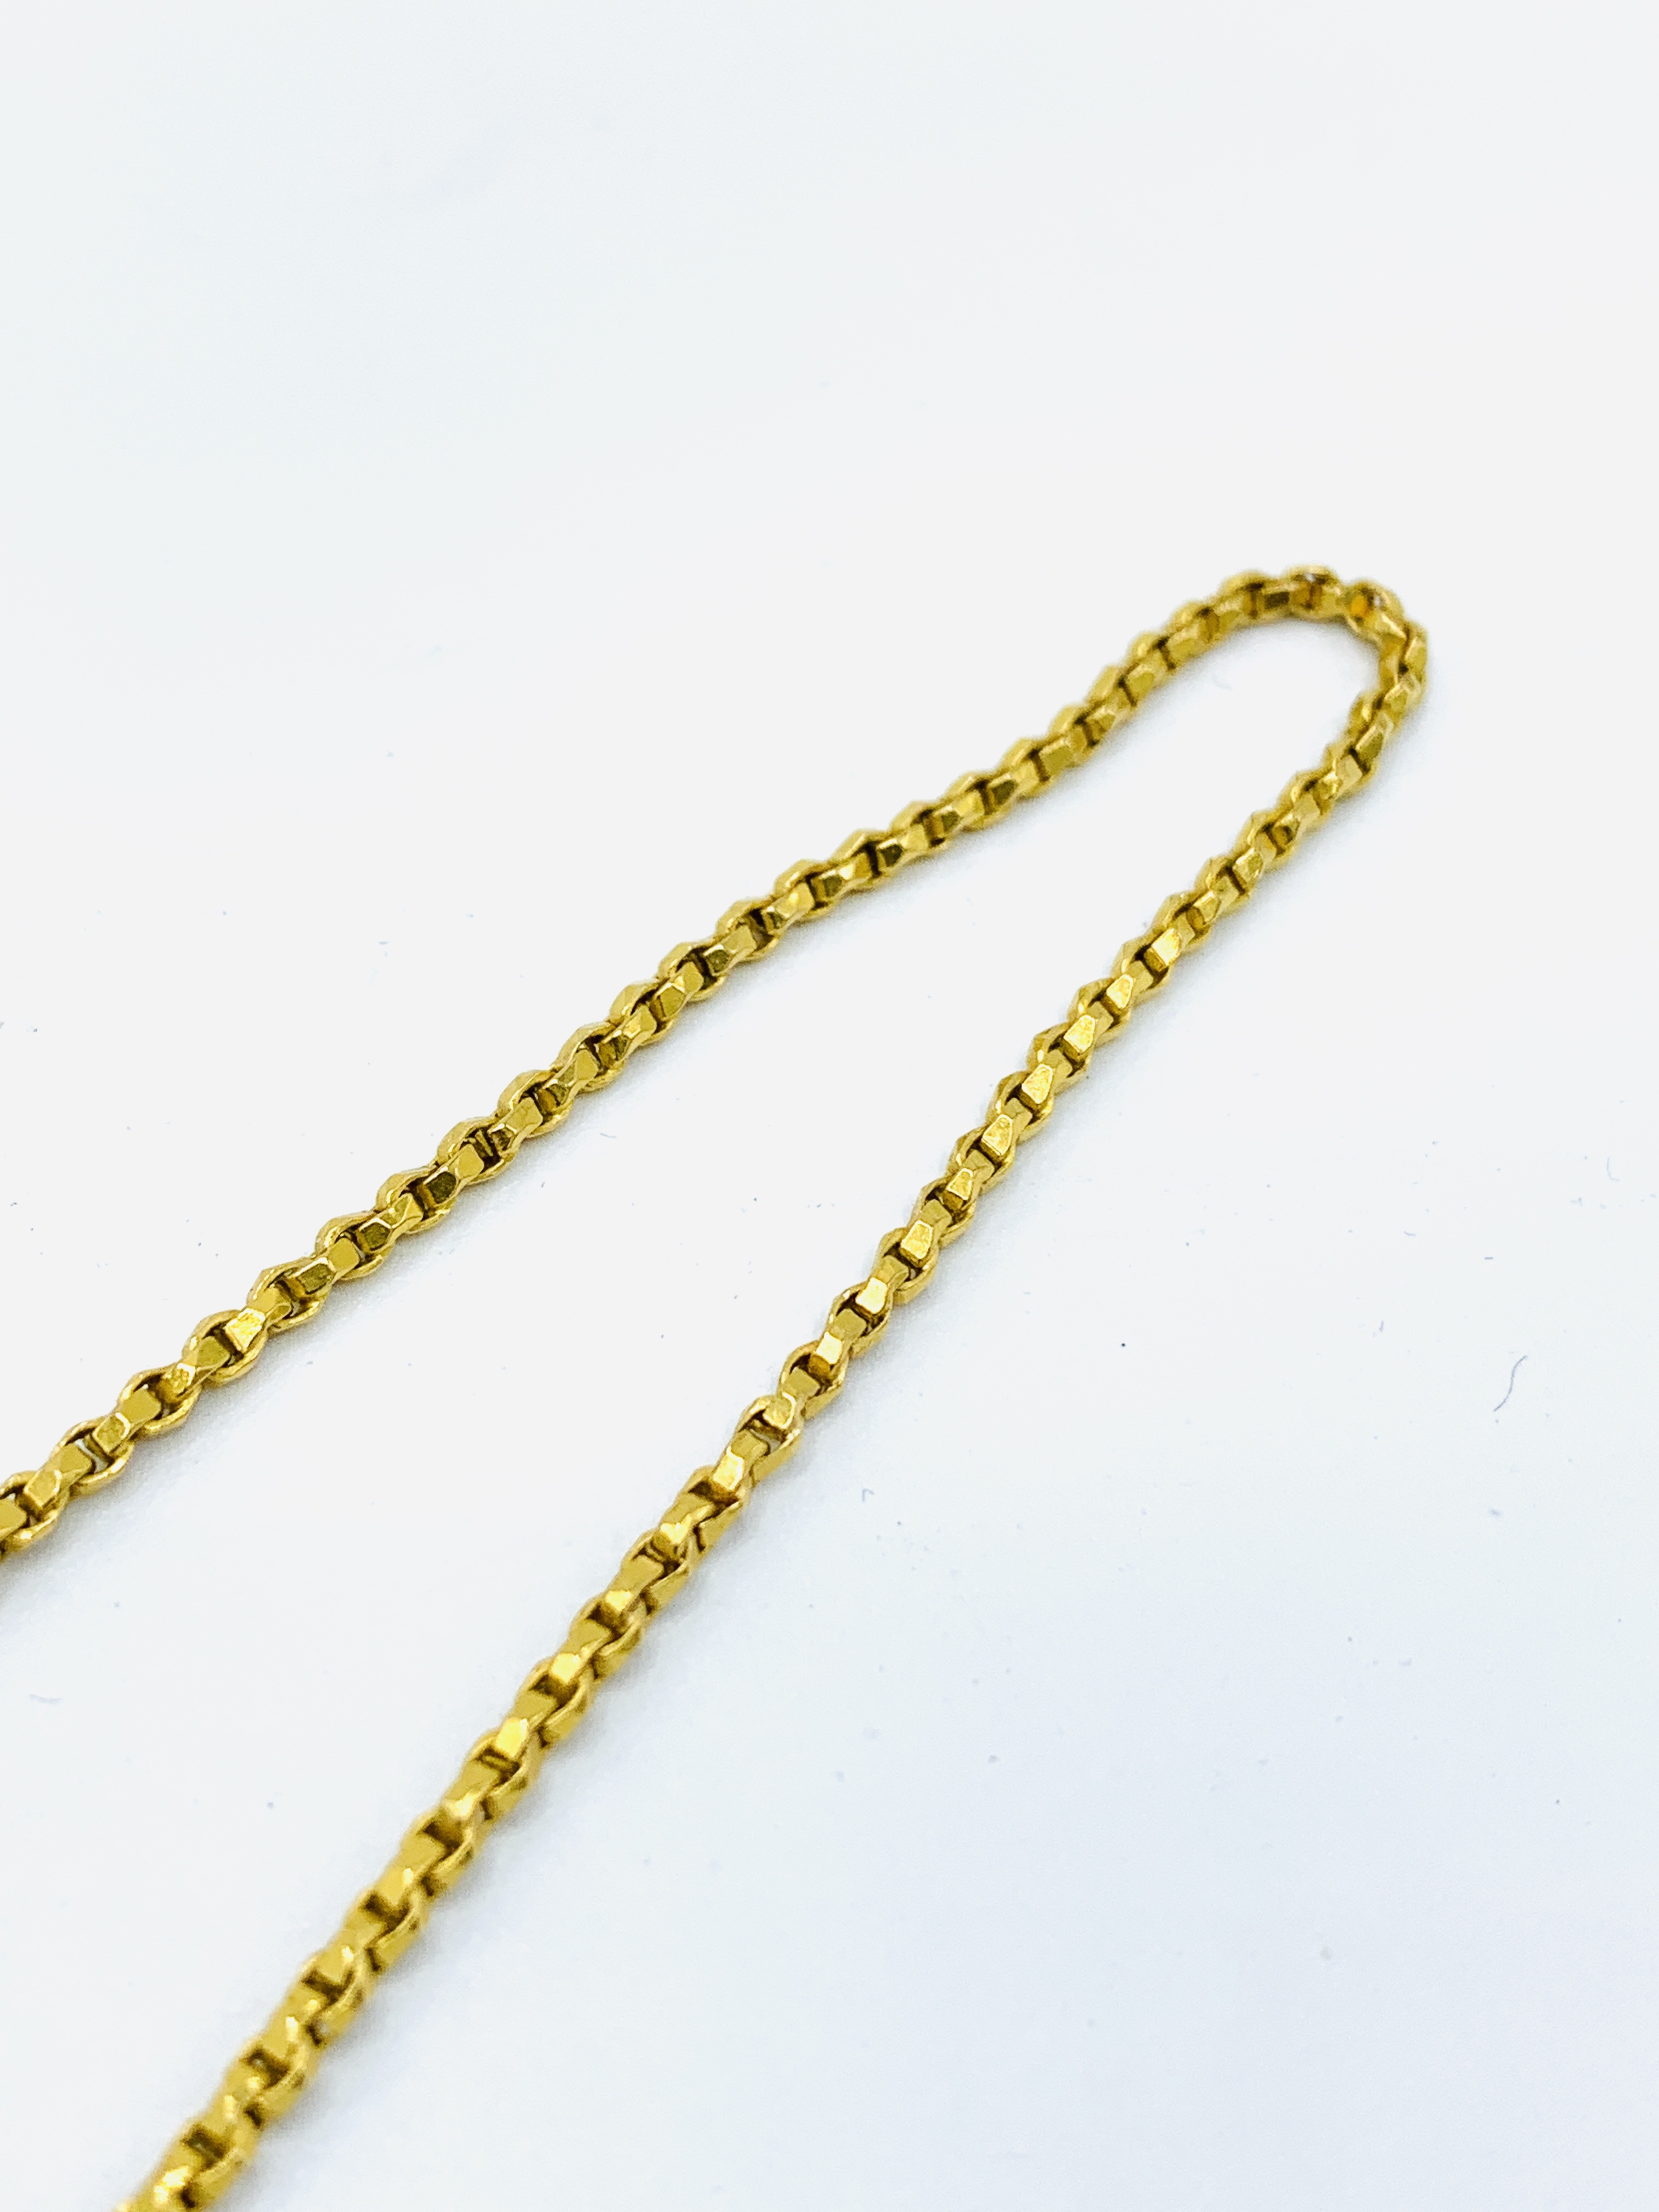 18ct gold chain - Image 5 of 5